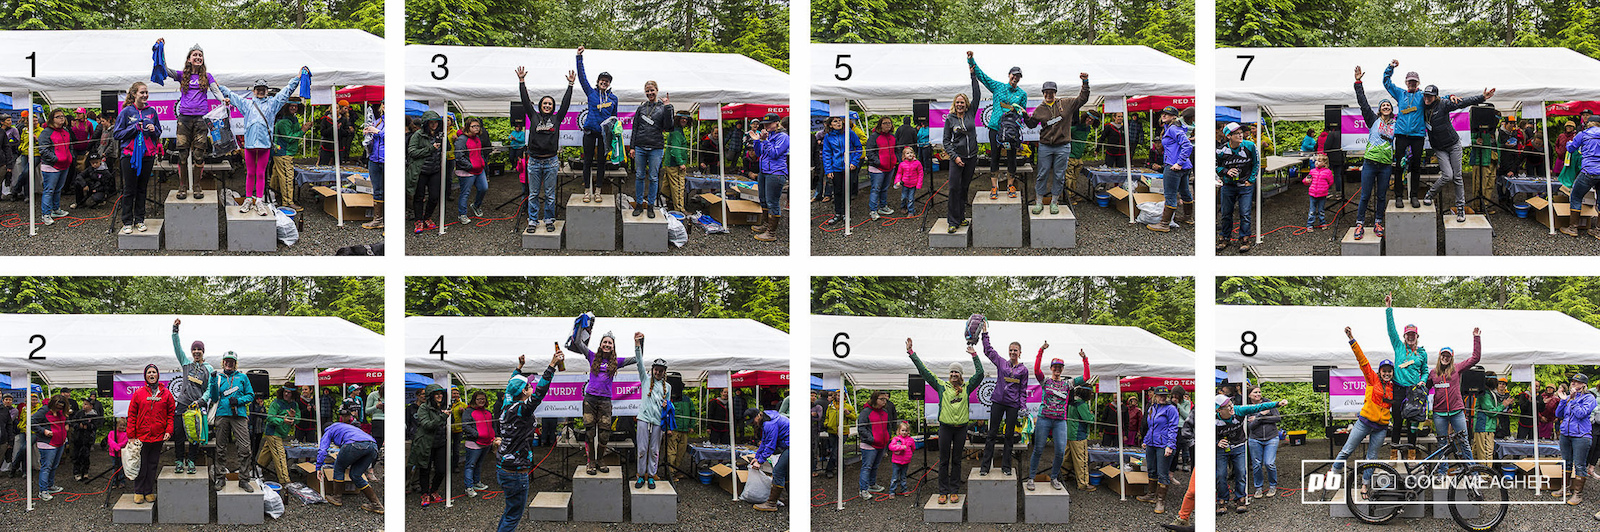 There were nine podiums in all. They were (winners listed L-R): 1) Beginner Junior podium Autumn Parham (3), a stand in for Torrey Lind (1), and Callah Robinson (2); 2) Beginner Master podium Paige Anderson (3), Kindahl Reed (1), and Jenn Jones (2); 3) Beginner podium Andrea Mayes (3), Katie Sox (1), and Liza Bee Hodgins (2); 4) Sport Junior podium Alli Gaertner (DNF and not present for the podium), Elena Runyan (1), and Nyla Stephens (2); 5) Sport Master podium Kathy Salisbury (3), Nathalie Mikinka (1), and  Hidi Cramer (2); 6) Sport podium Kathryn Irish (3), Selina Miller (1), and Jessica Hatch (2); 7) Expert Masters Amy Josefczyk (3), Cristine Smith(1), and Elaine Bothe (2); and 8) Expert Amanda Bryan (3), Delia Massey (1), and Michelle Warner (2).